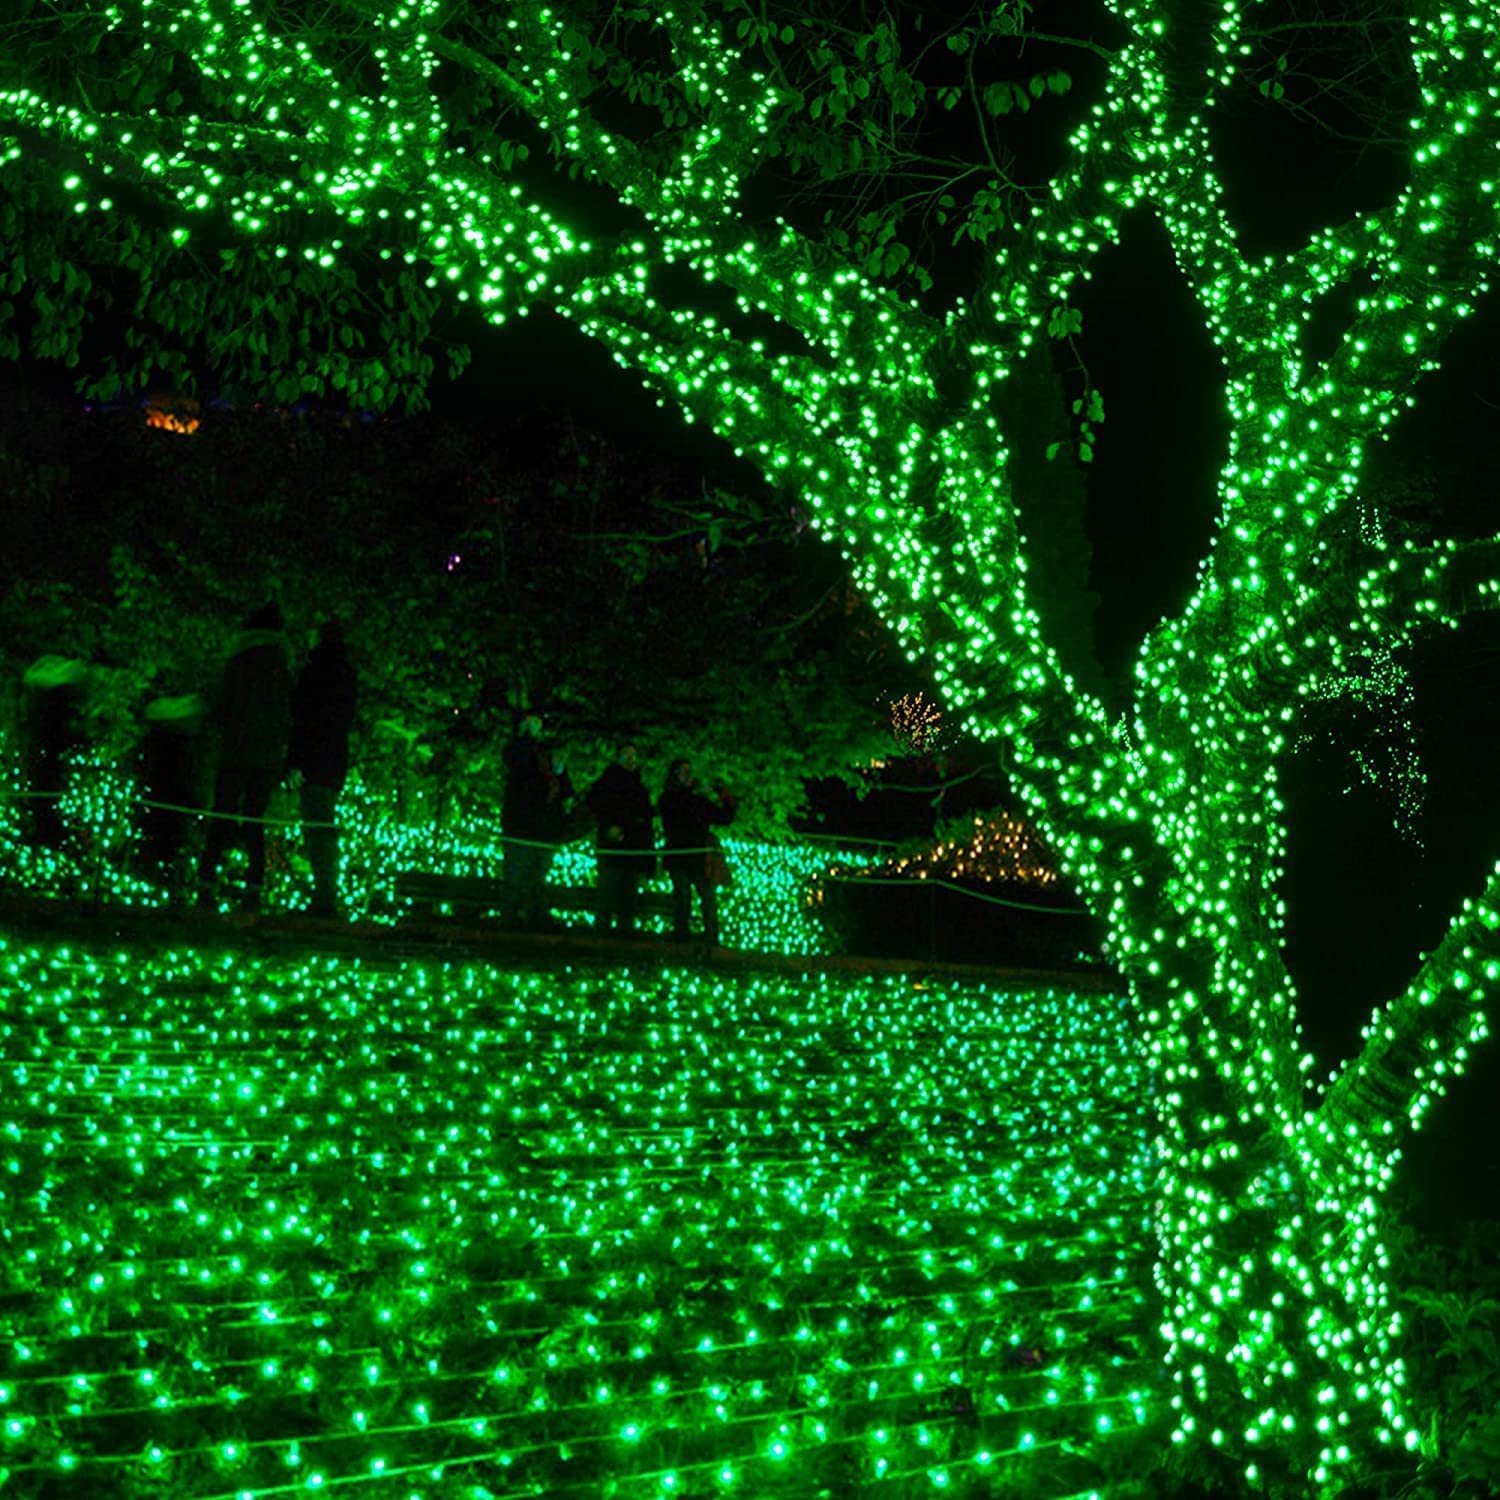 A festive green tree adorned with twinkling lights stands in the center of a park.